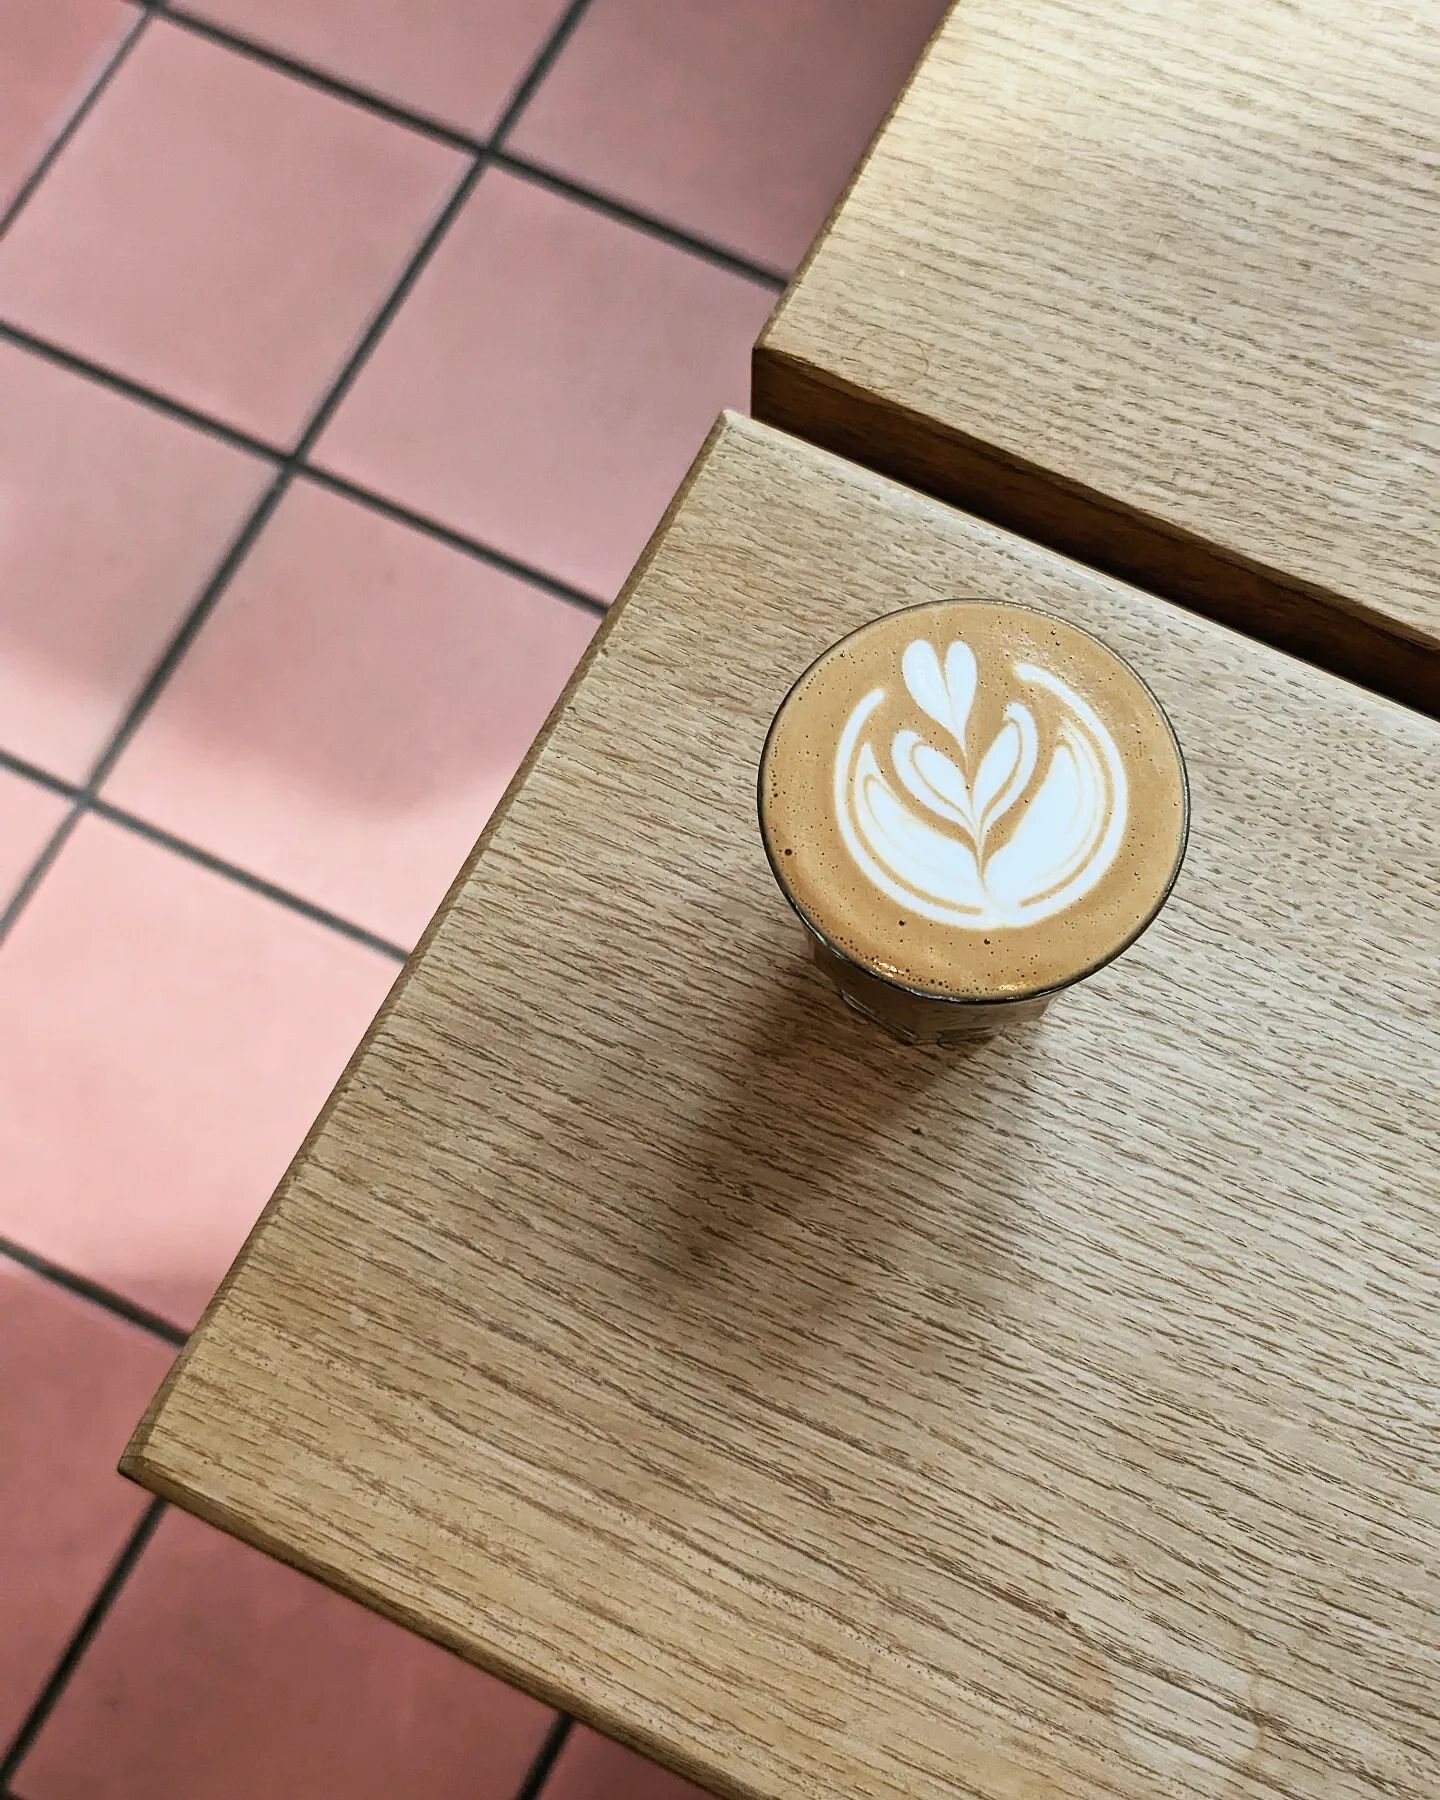 The only way to get through a Monday afternoon is with a cortado from Never Coffee 🤤

@neverlab